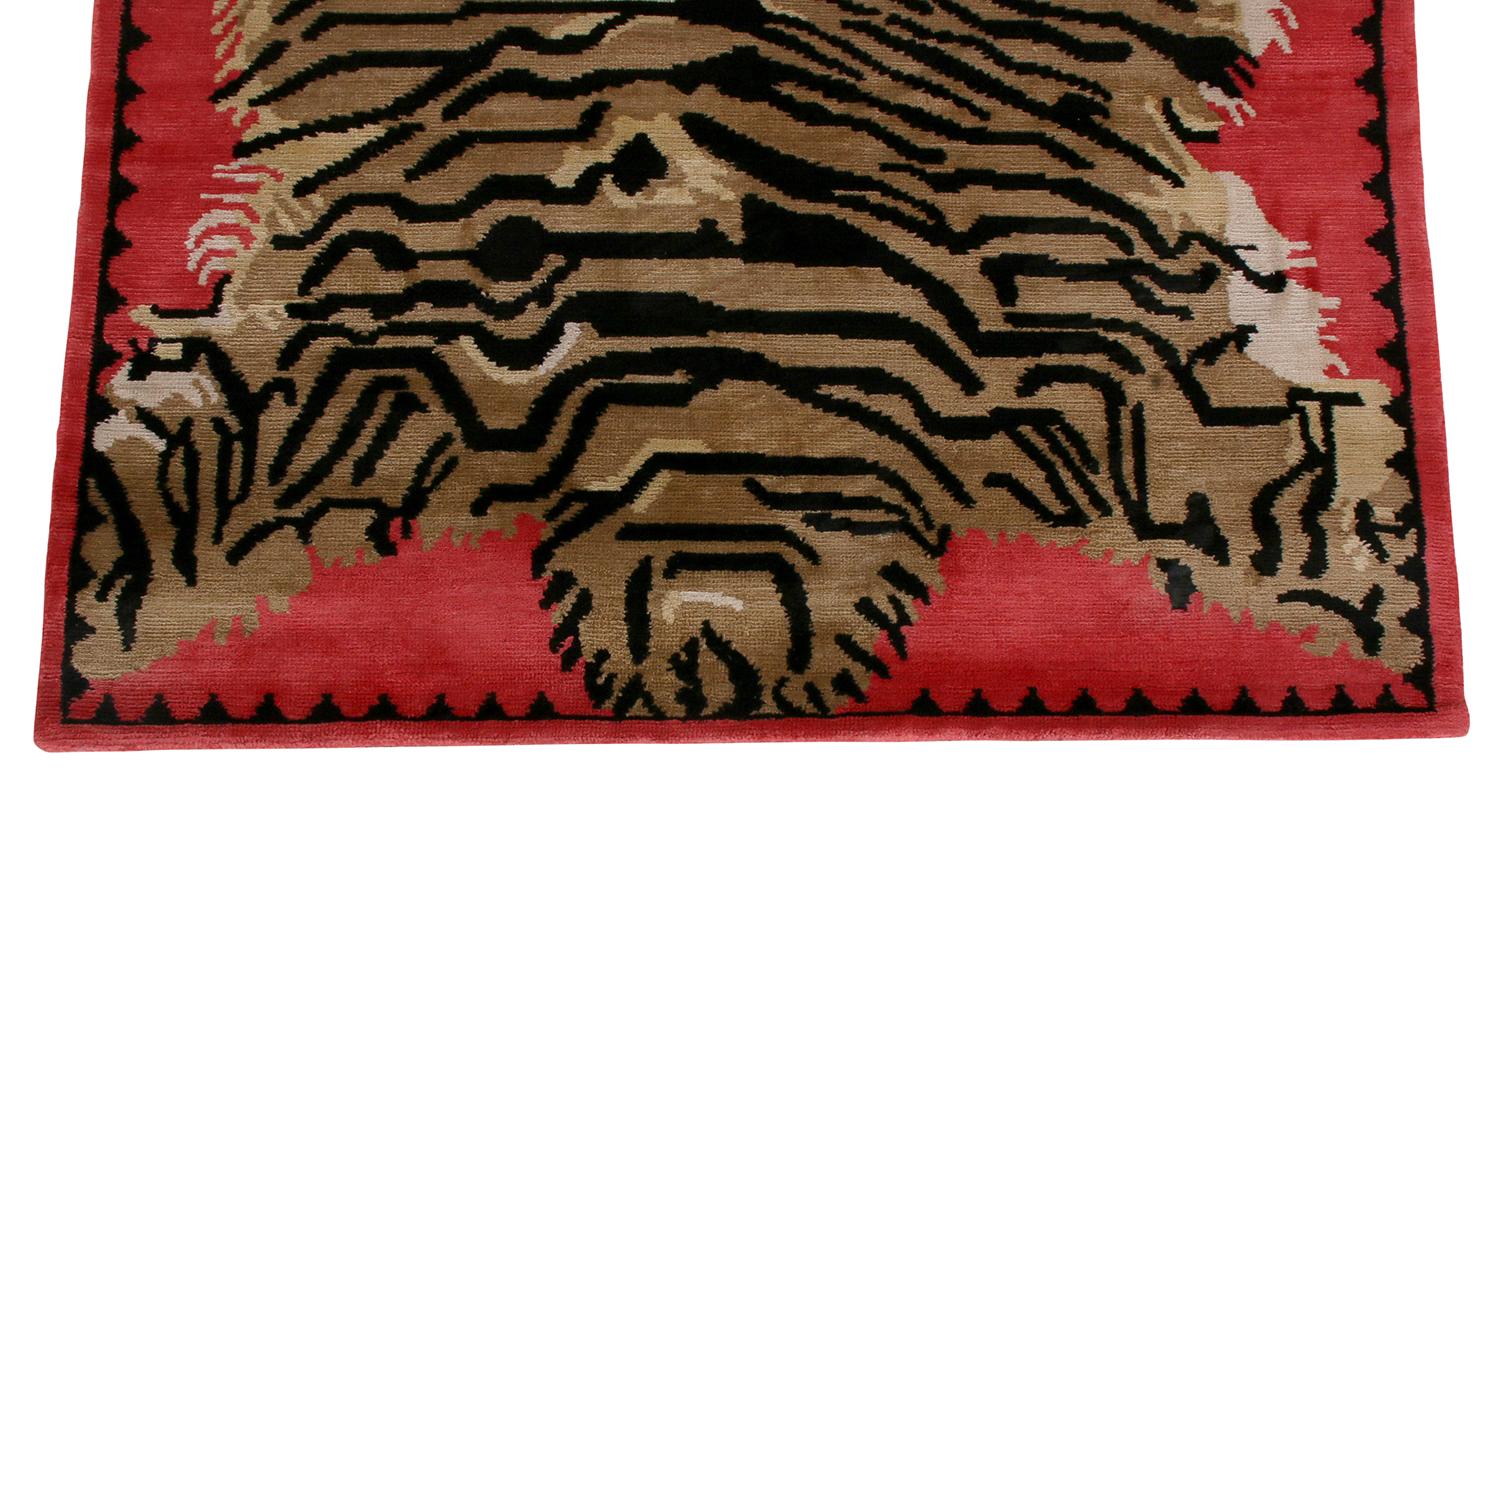 Hand-Knotted Rug & Kilim’s Tiger Pictorial Red Orange and Black Wool and Silk Rug